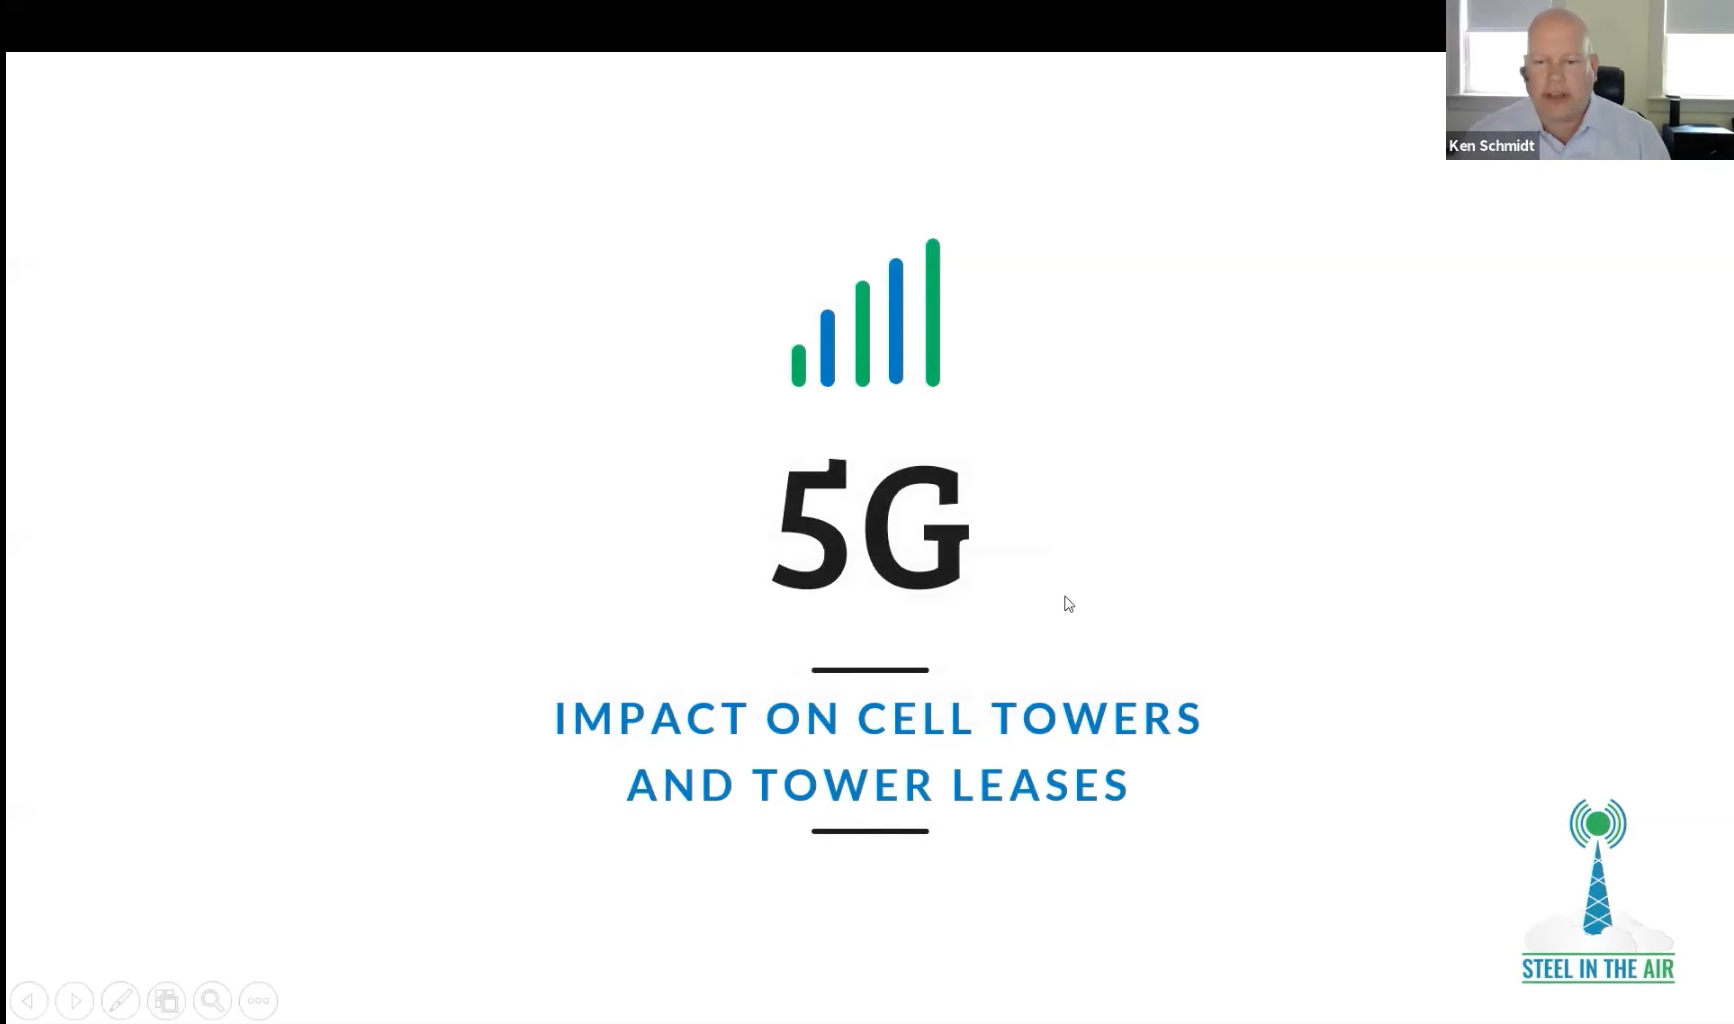 The Impact of 5G On Cell Towers and Tower Leases